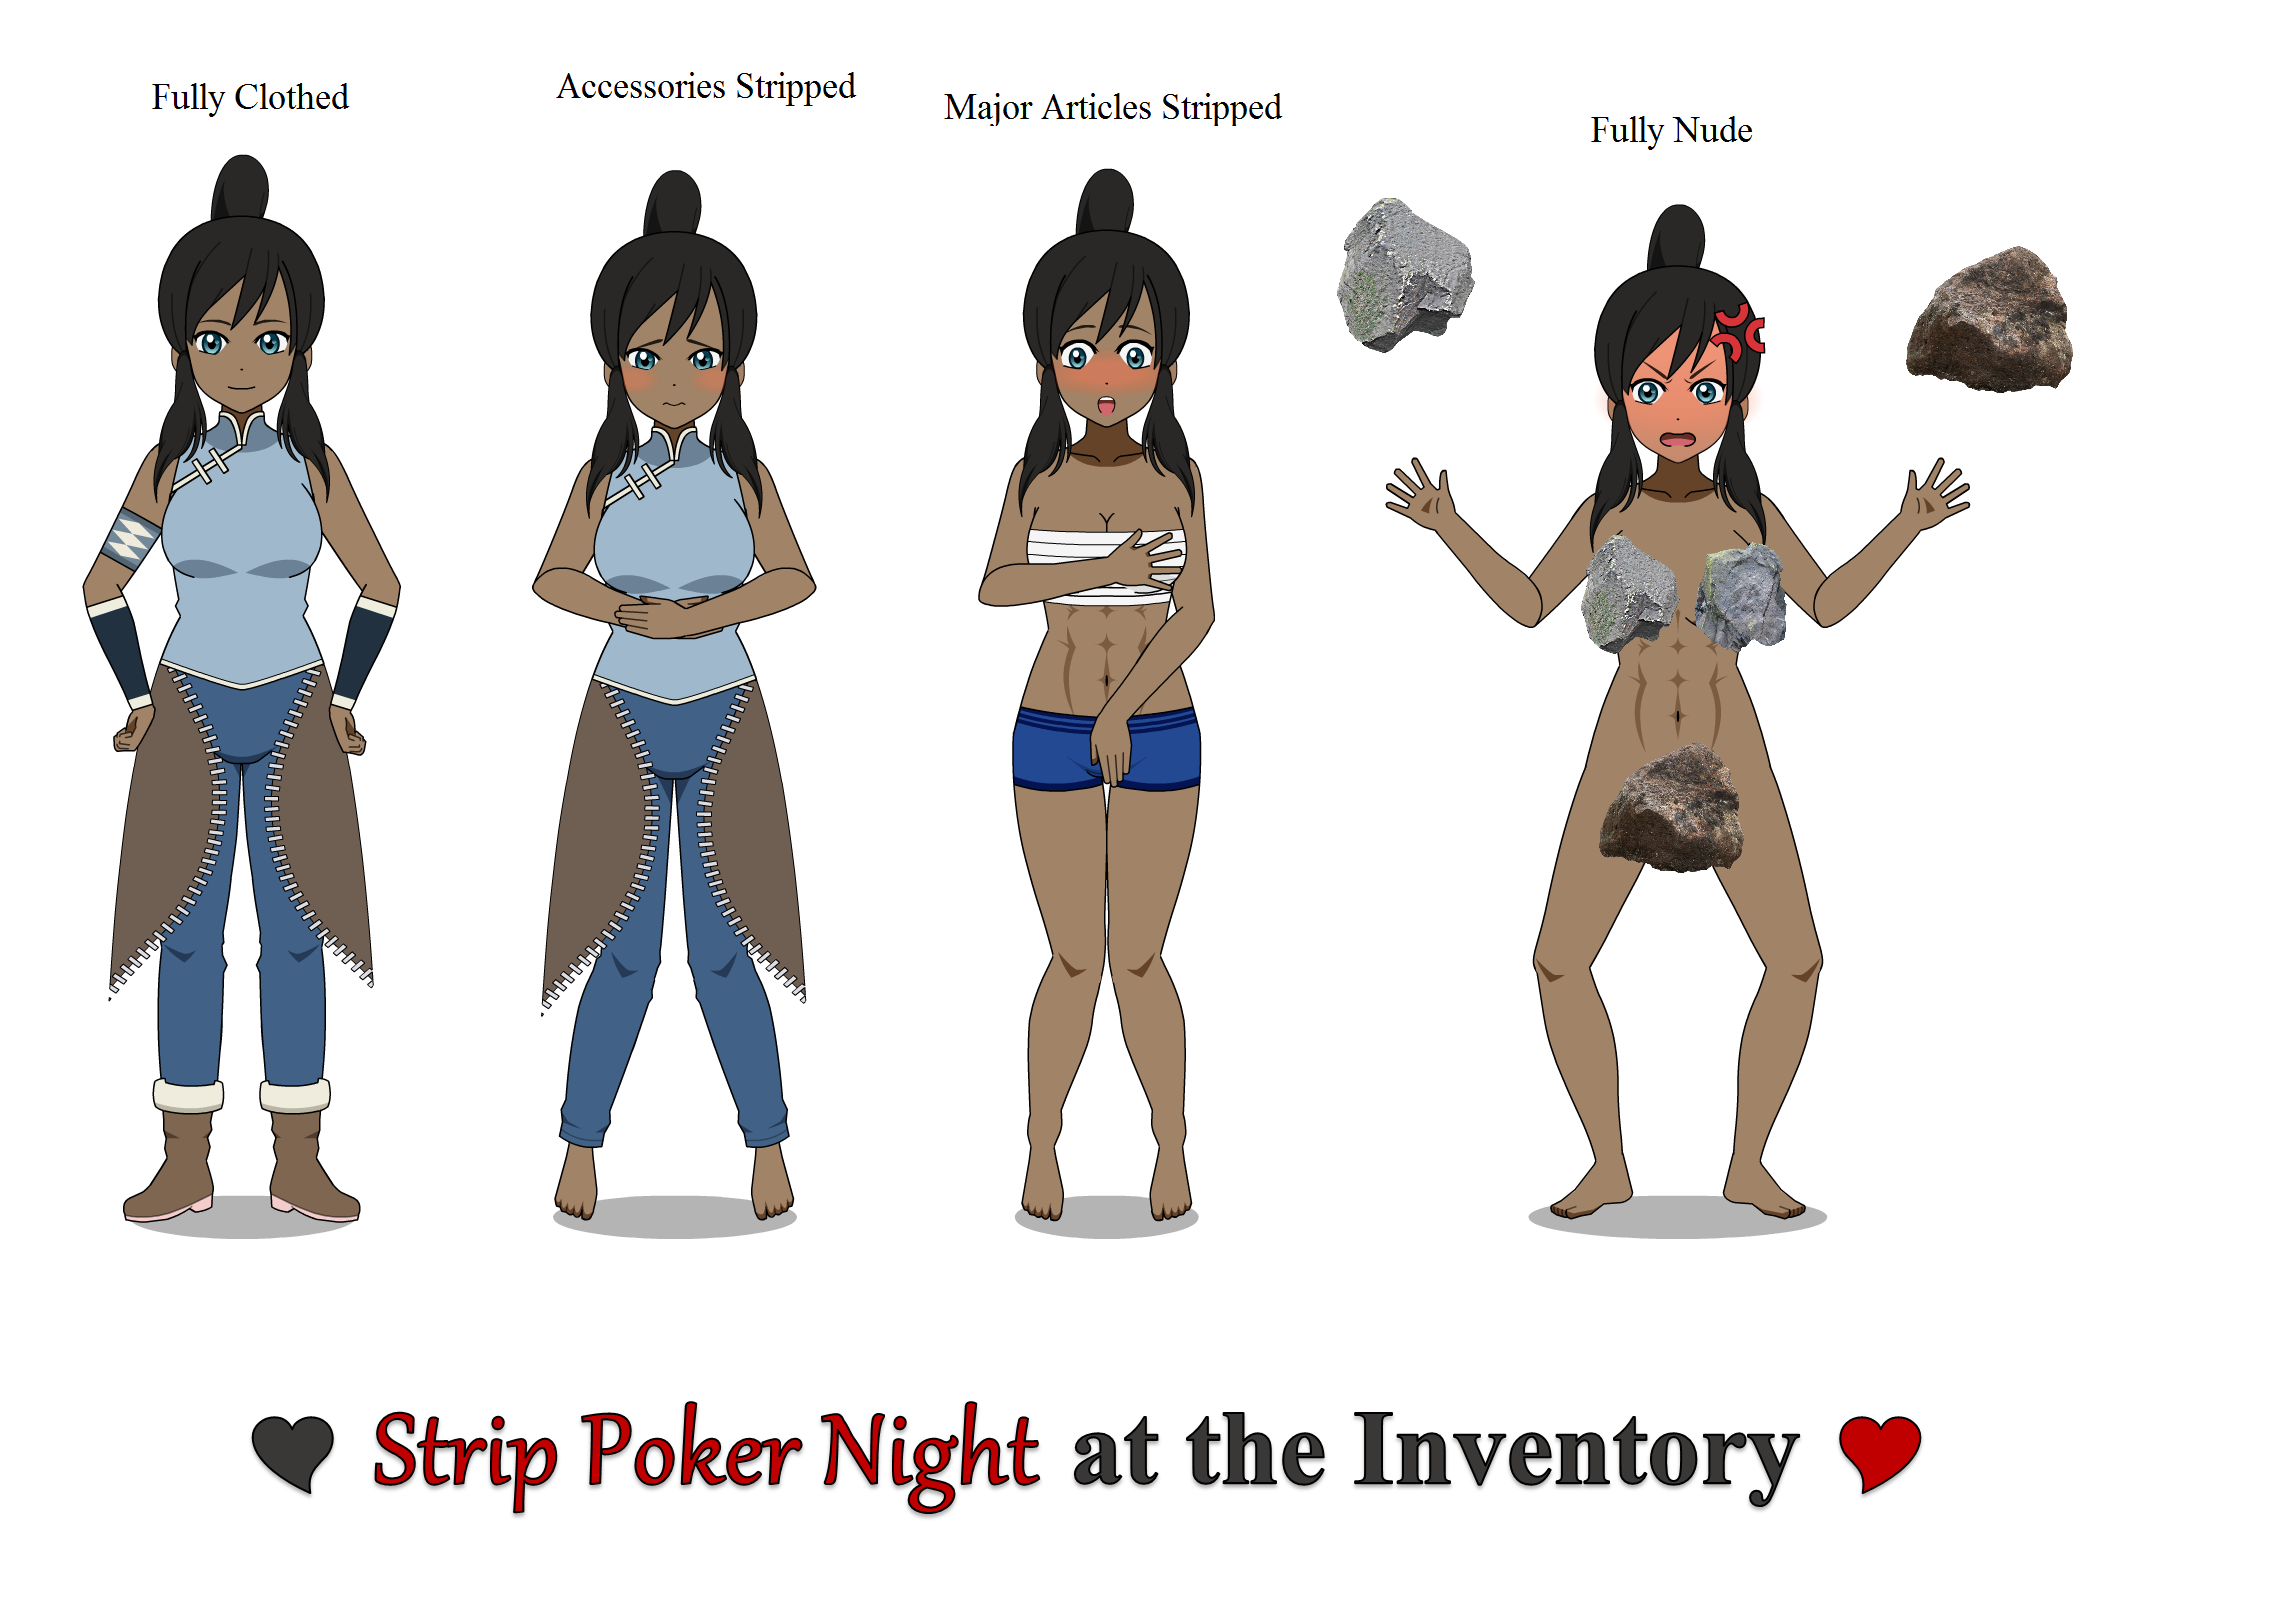 Strip poker the inventory